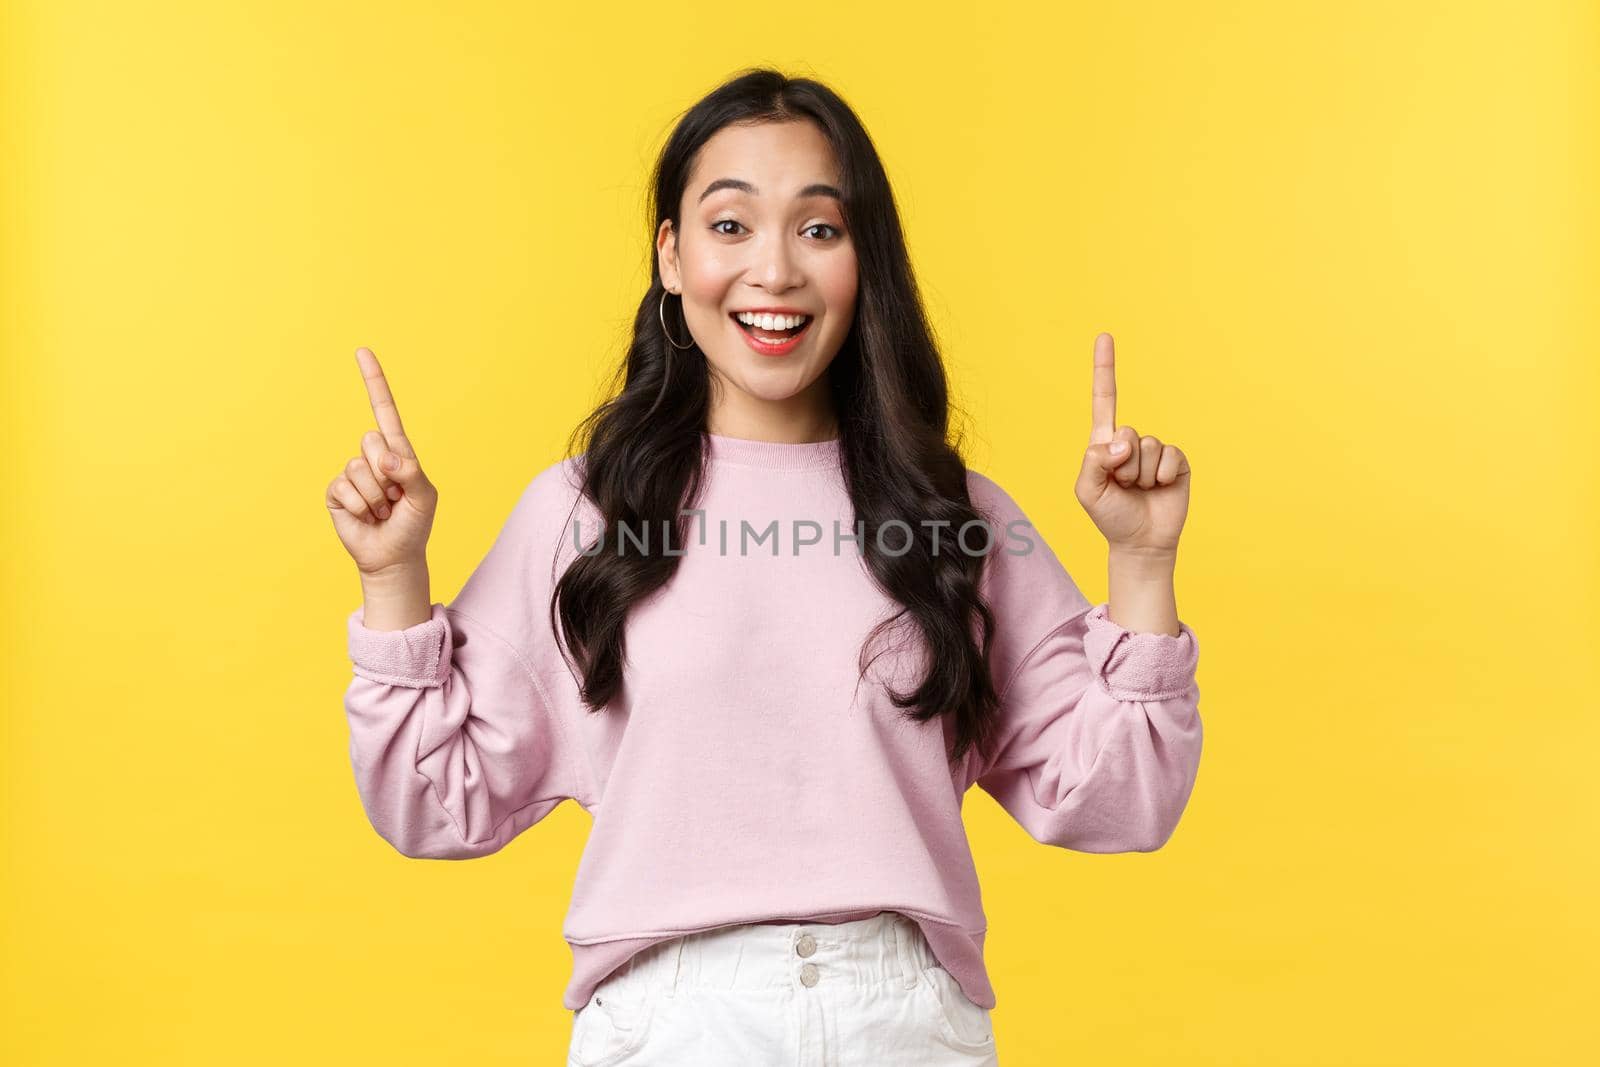 People emotions, lifestyle and fashion concept. Smiling female student showing summer vacation offers, special promo or discounts at store, pointing fingers up and smiling, yellow background.